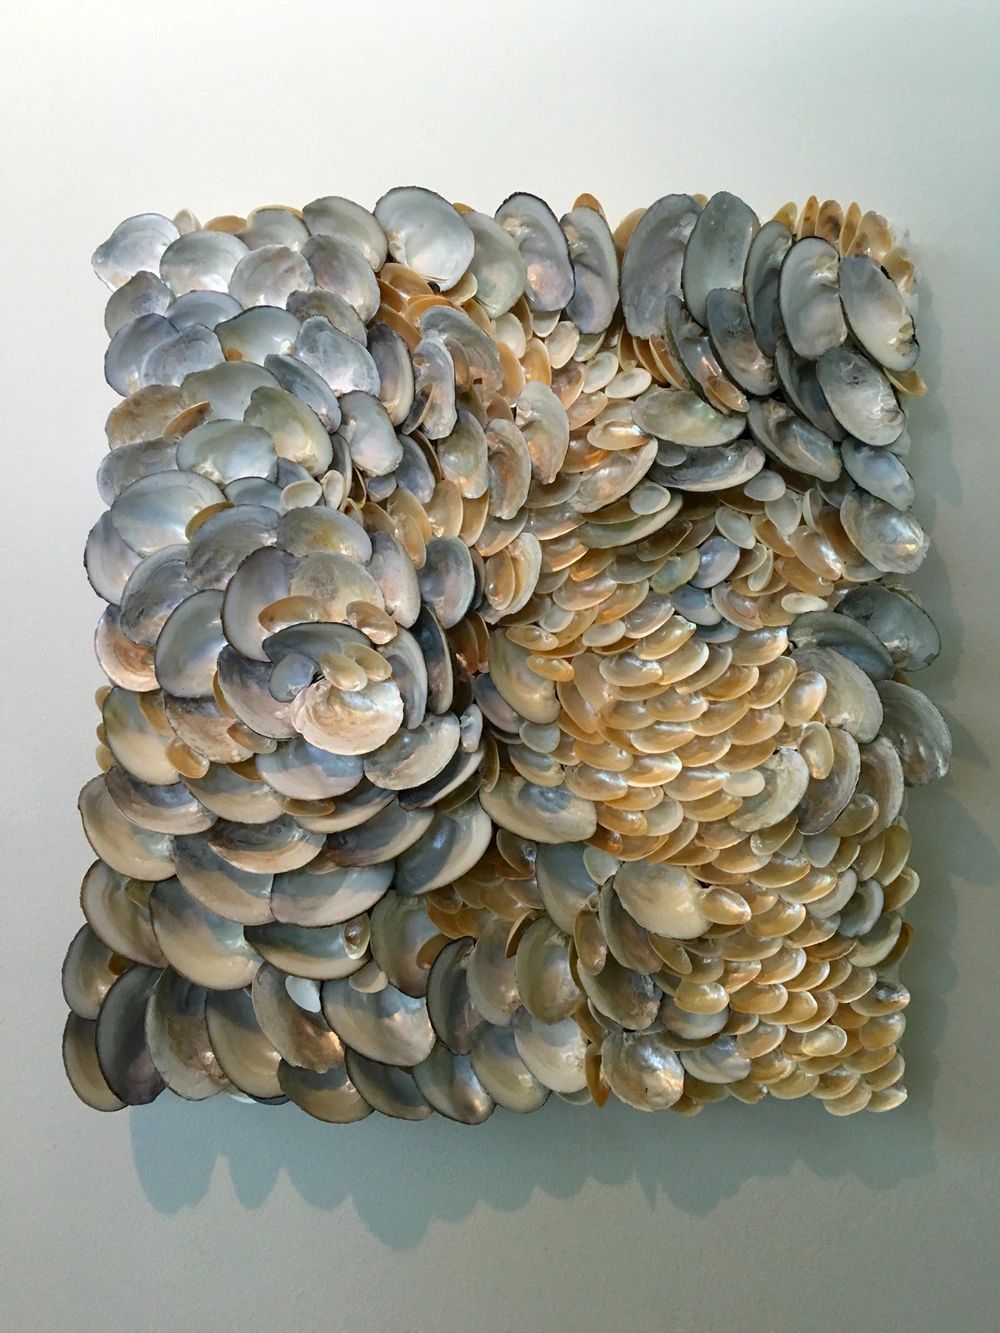 "Learning to Swim" is a wall sculpture made of mussel shells.